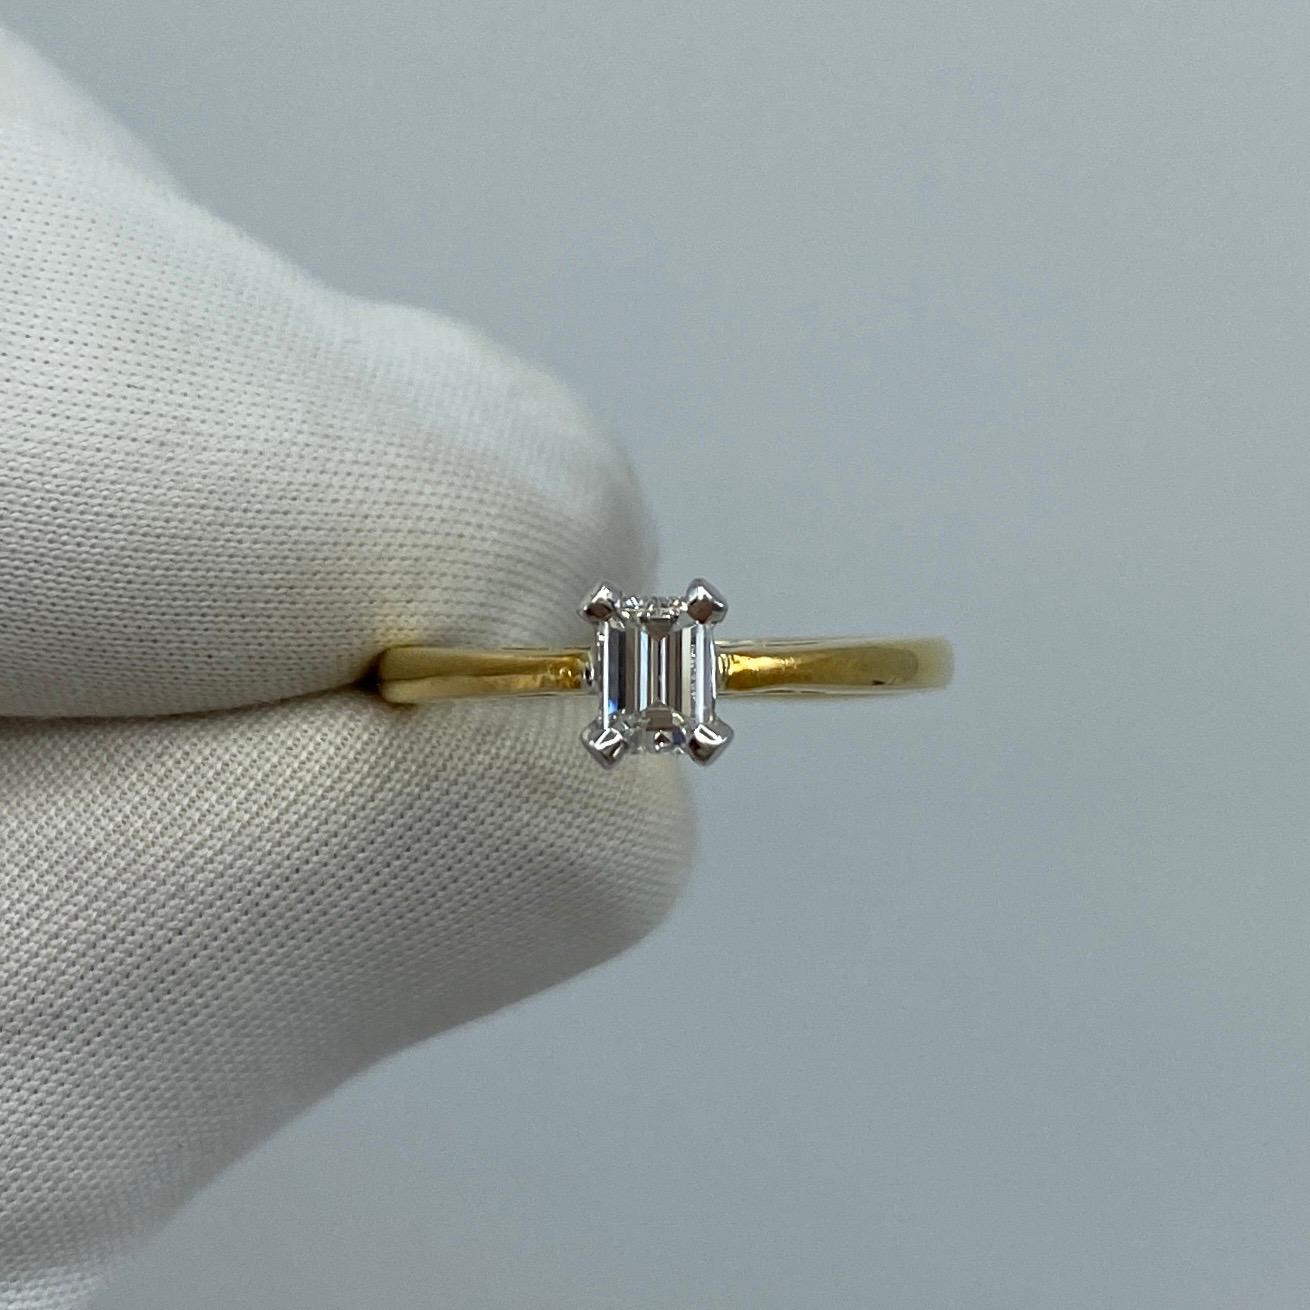 18k Yellow & White Gold Emerald Cut Diamond Solitaire Ring.

0.29 Carat diamond with Si1 clarity and E/F colour. Also has an excellent emerald/octagonal cut.

Ring size I. The ring is re-sizeable.

Fully hallmarked to guarantee metal quality.

Some